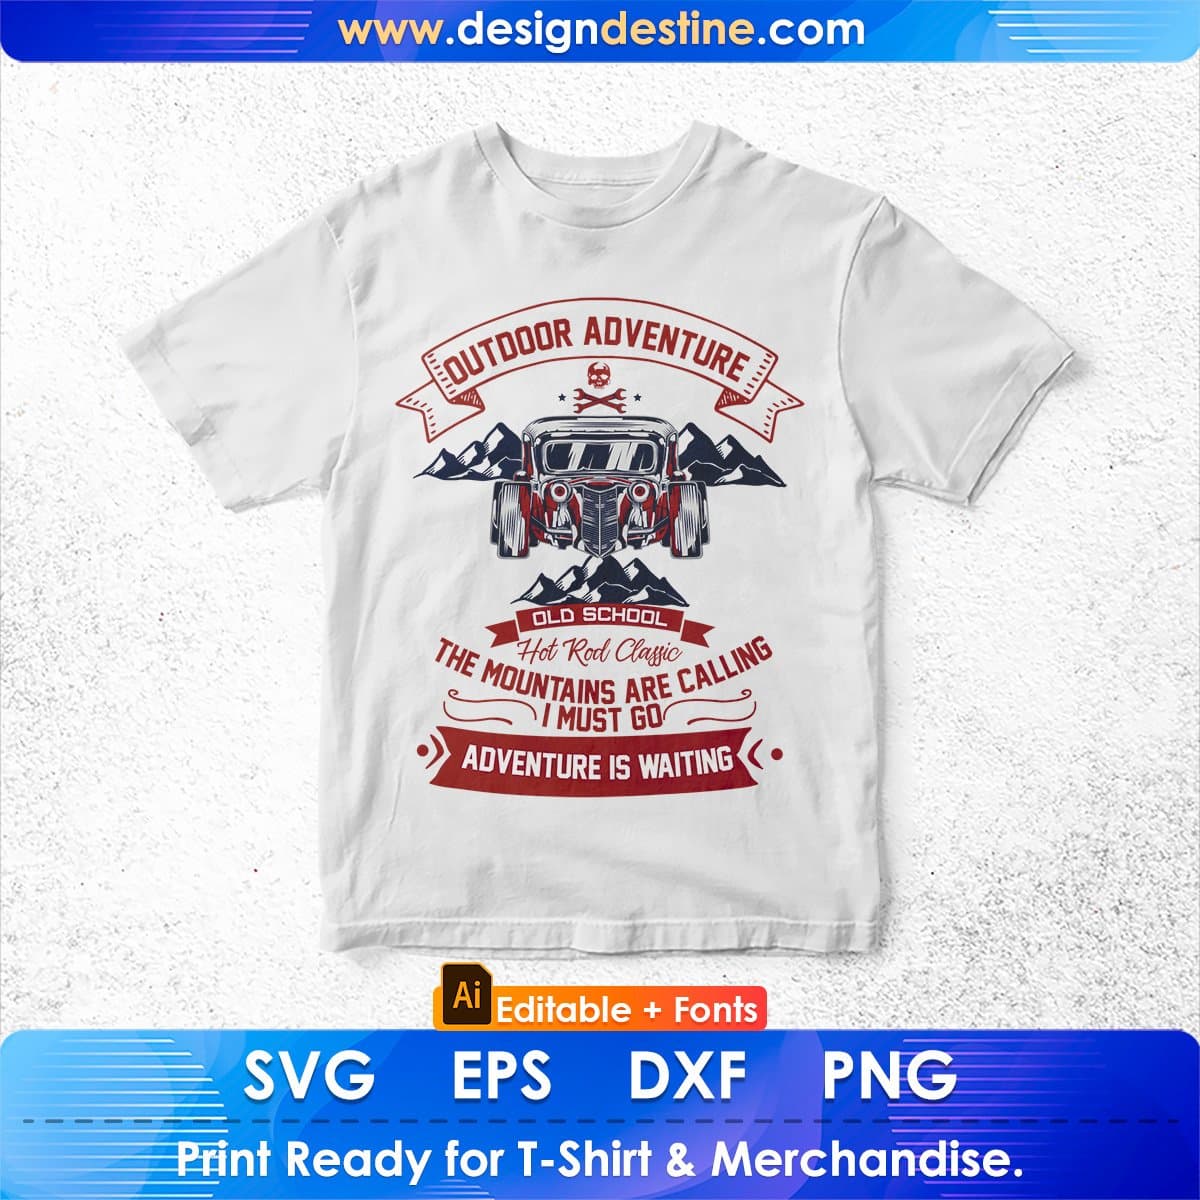 Outdoor Adventure Old School Hot Rod Auto Racing Editable T shirt Design In Ai Svg Files